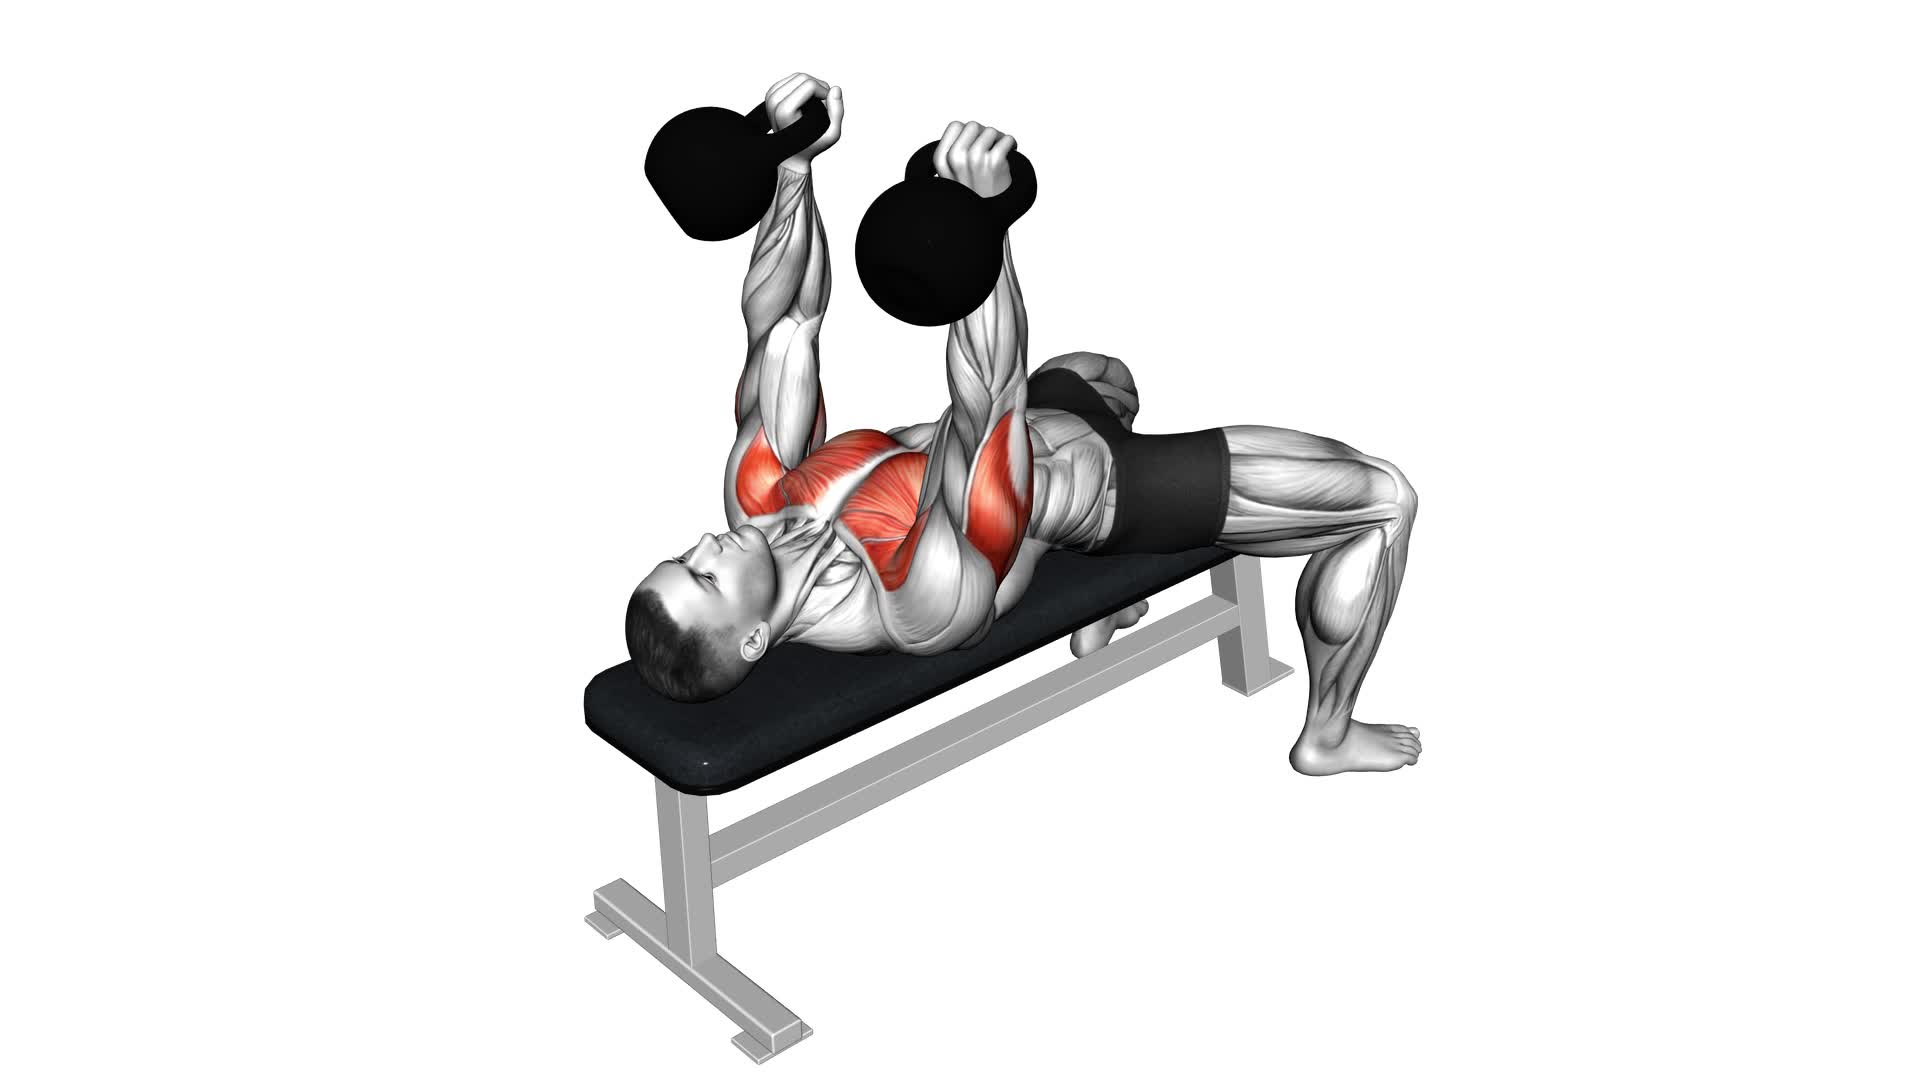 Kettlebell Bench Press (male) - Video Exercise Guide & Tips